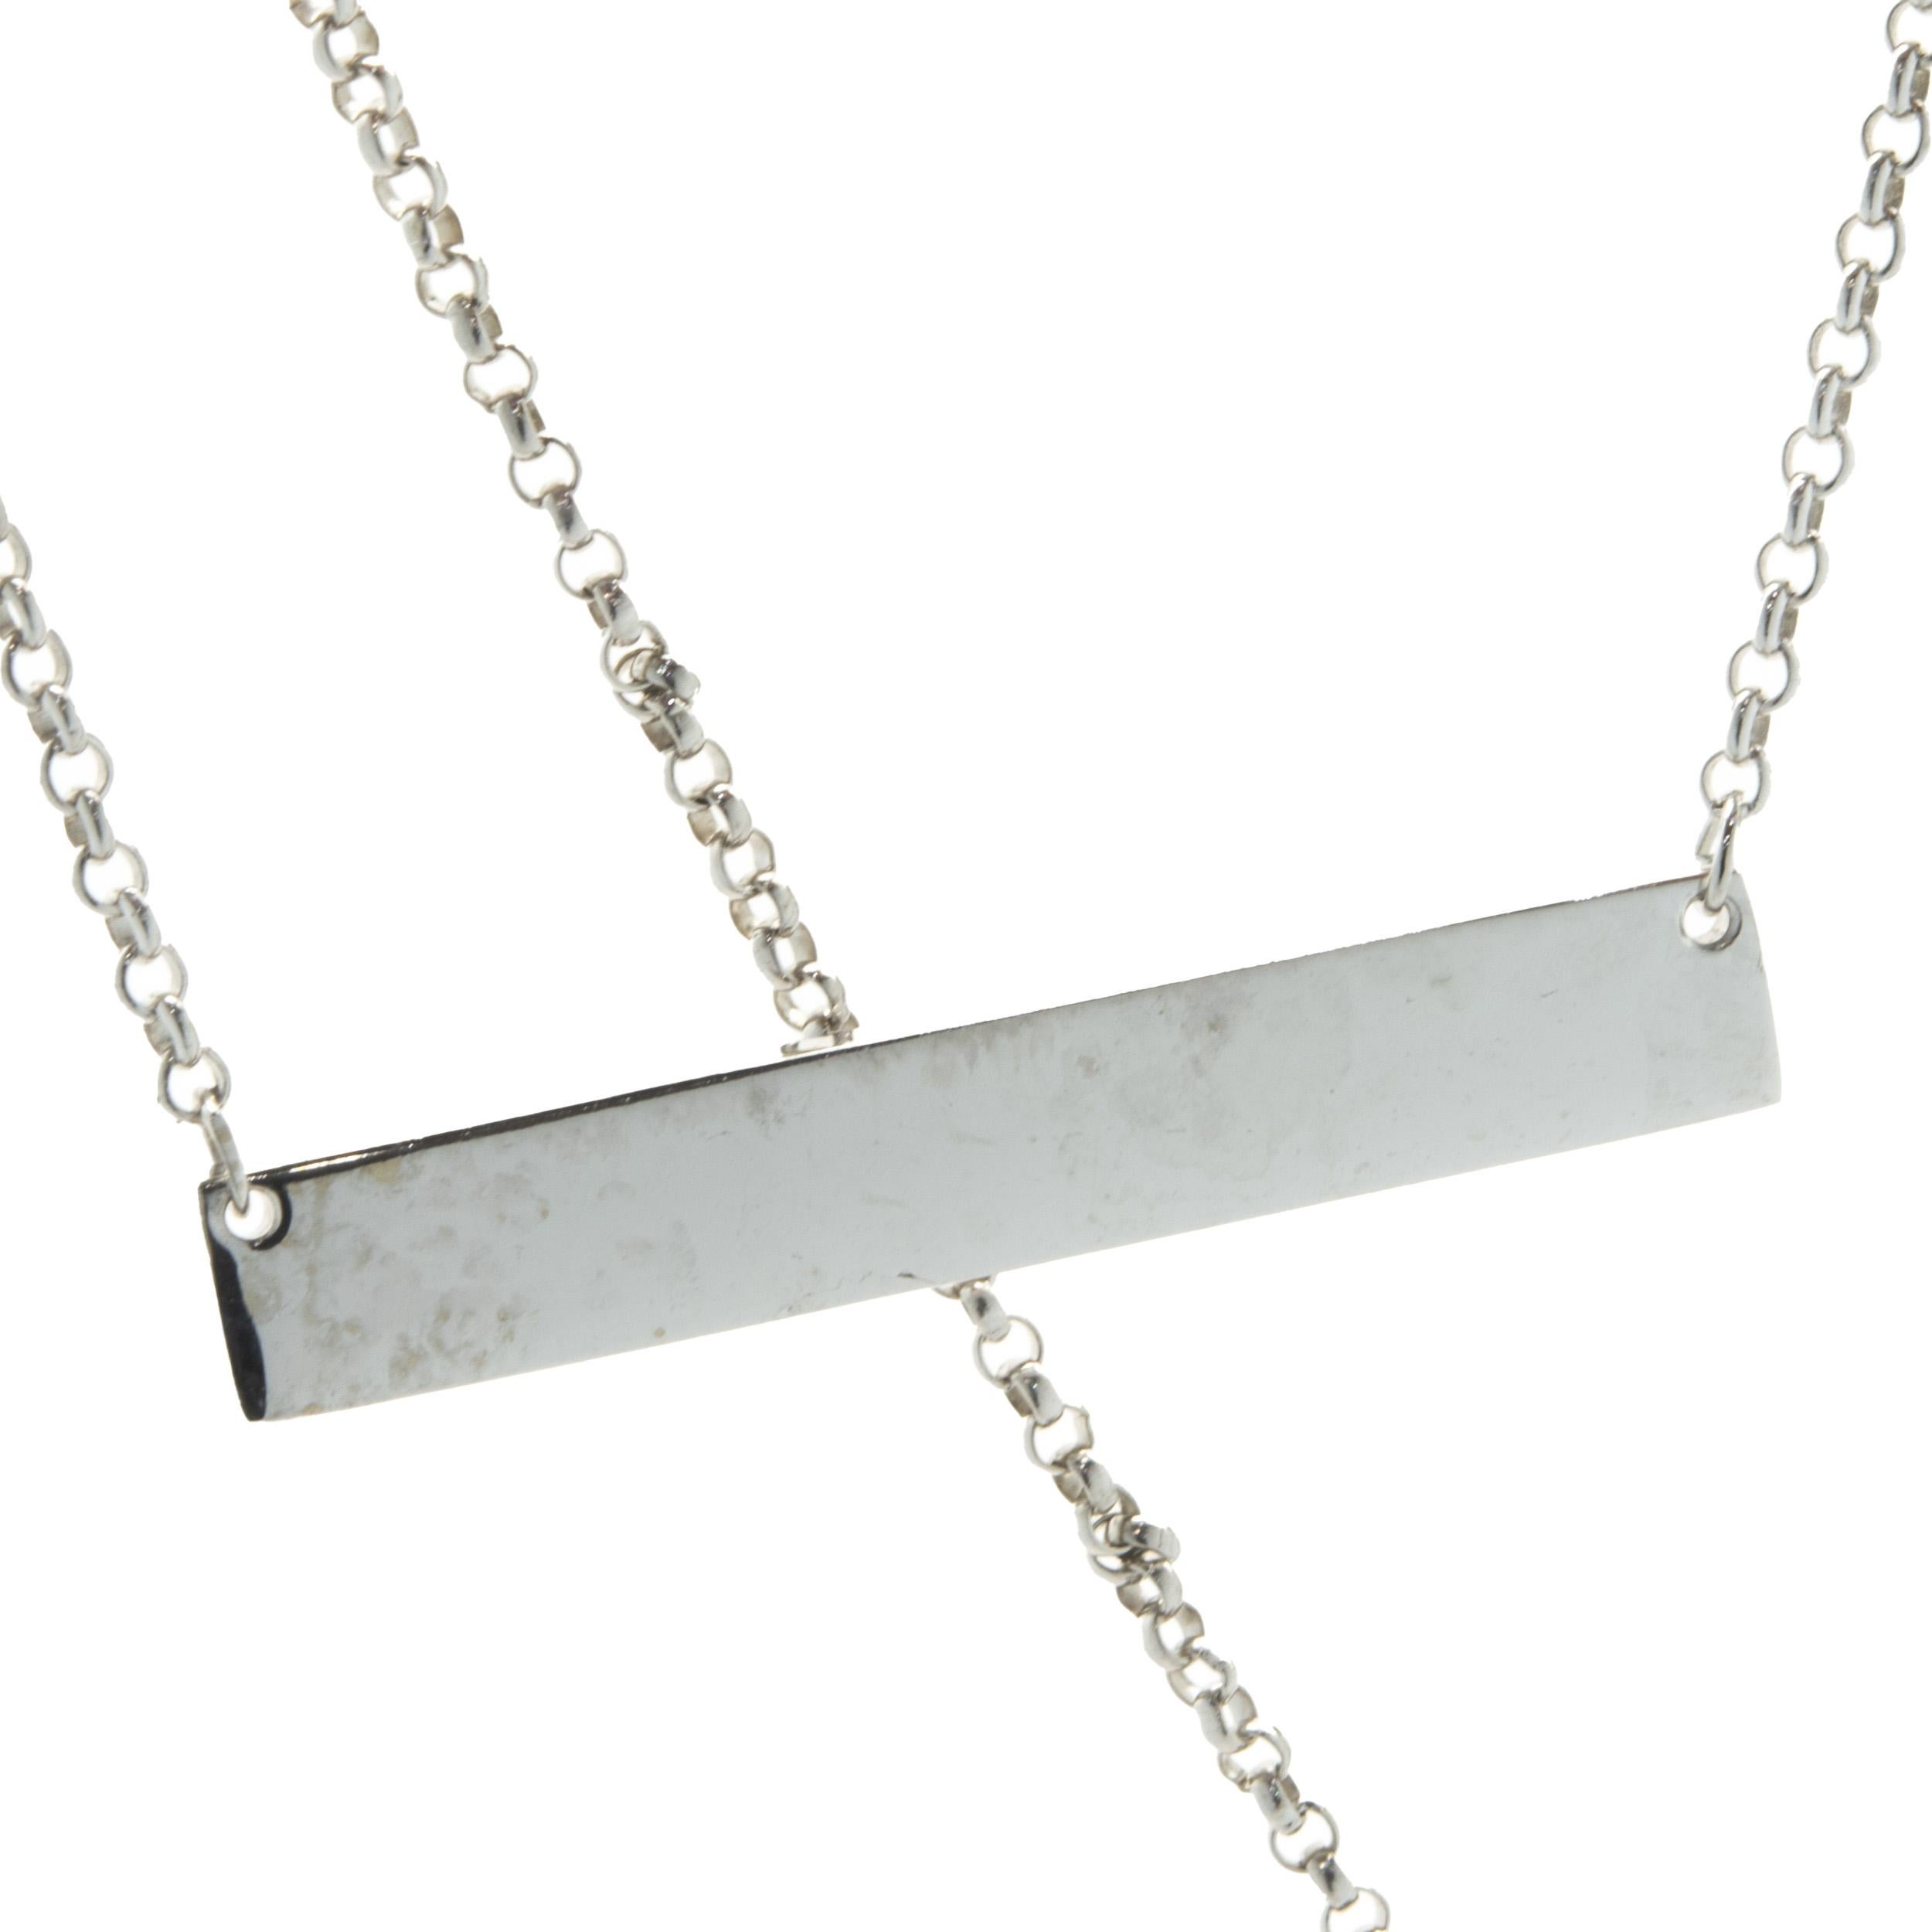 Designer: custom
Material: 14K white gold
Dimensions: necklace measures 16-inches in length
Weight: 11.8 grams
